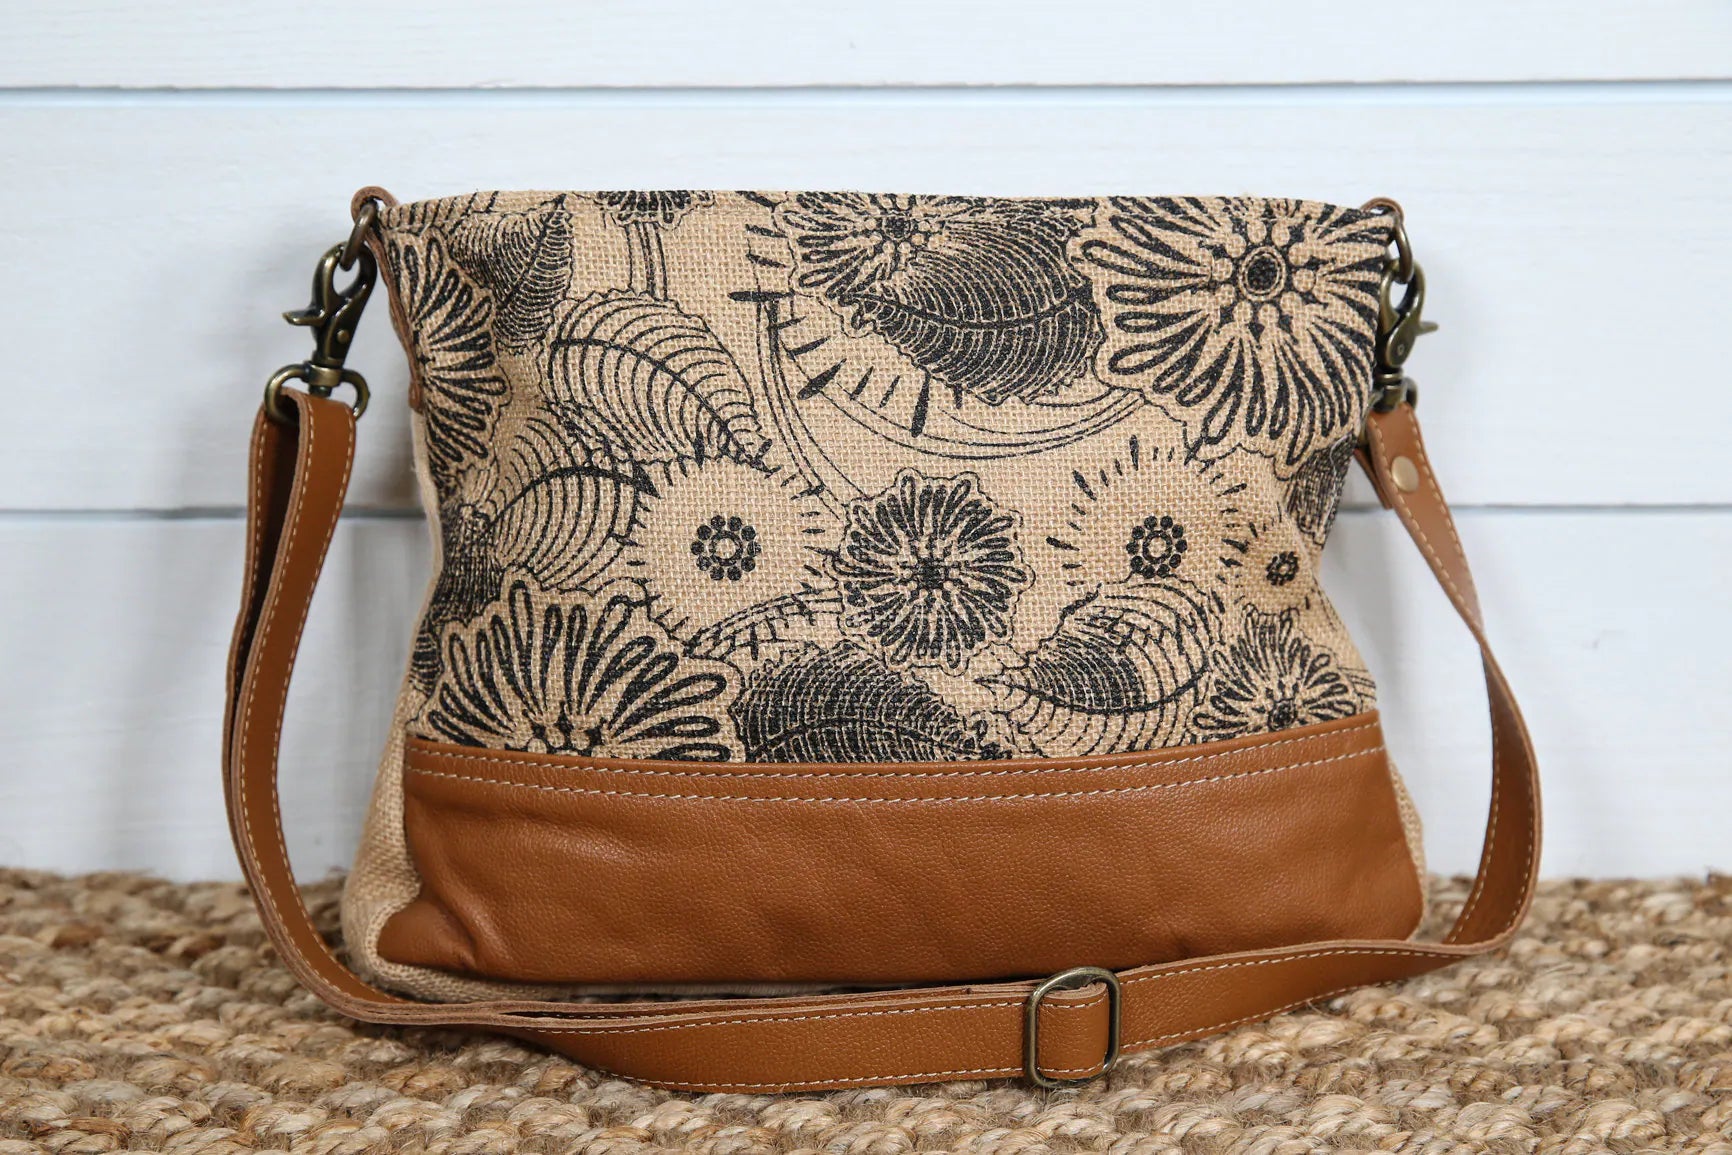 Crossbody Bags for Students: Practical and Stylish Options